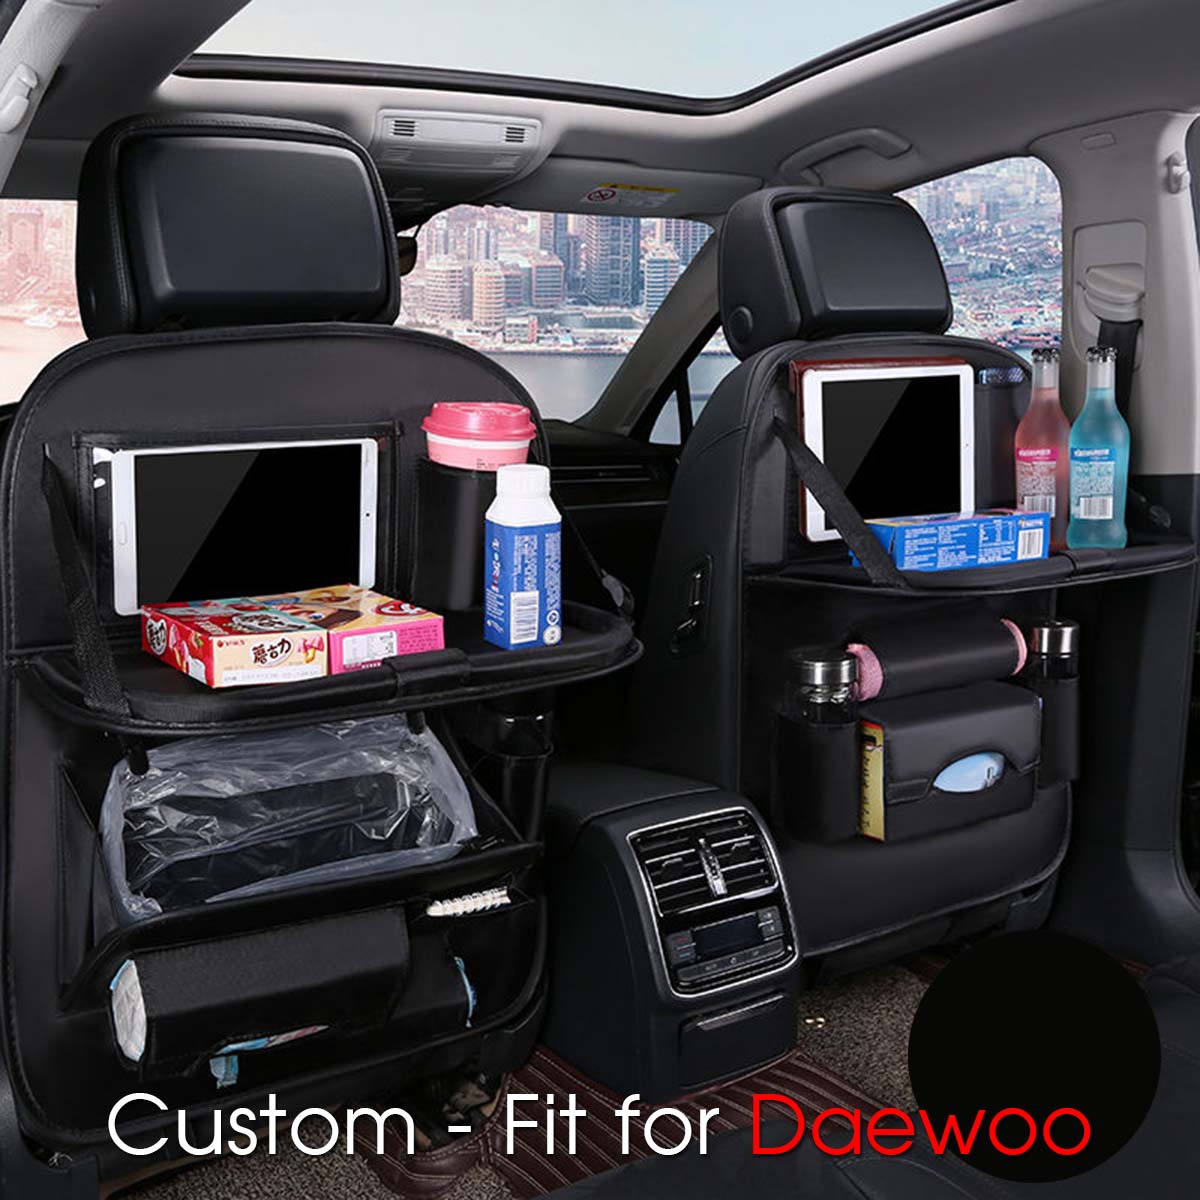 Backseat Organizer With Tablet Holder PU Leather, Custom Fit For Your Cars, Backseat Car Organizer, Car Seat Back Protectors Kick With Foldable Table Tray Car Seat Organizer, Car Accessories DA15987